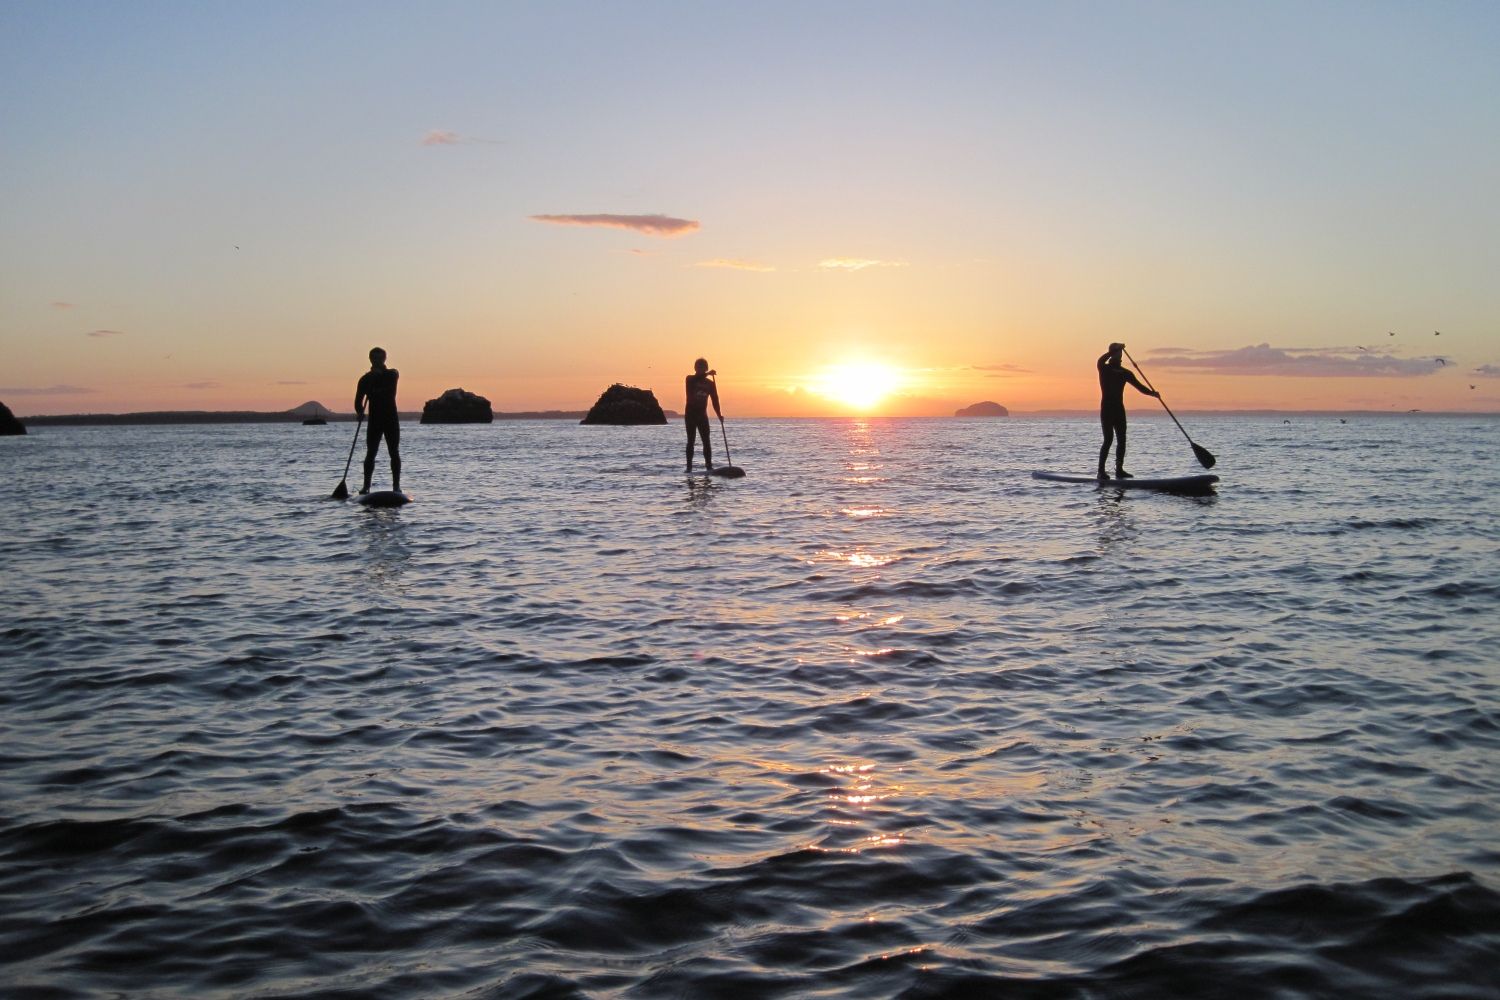 People on stand up paddleboards with sunset background